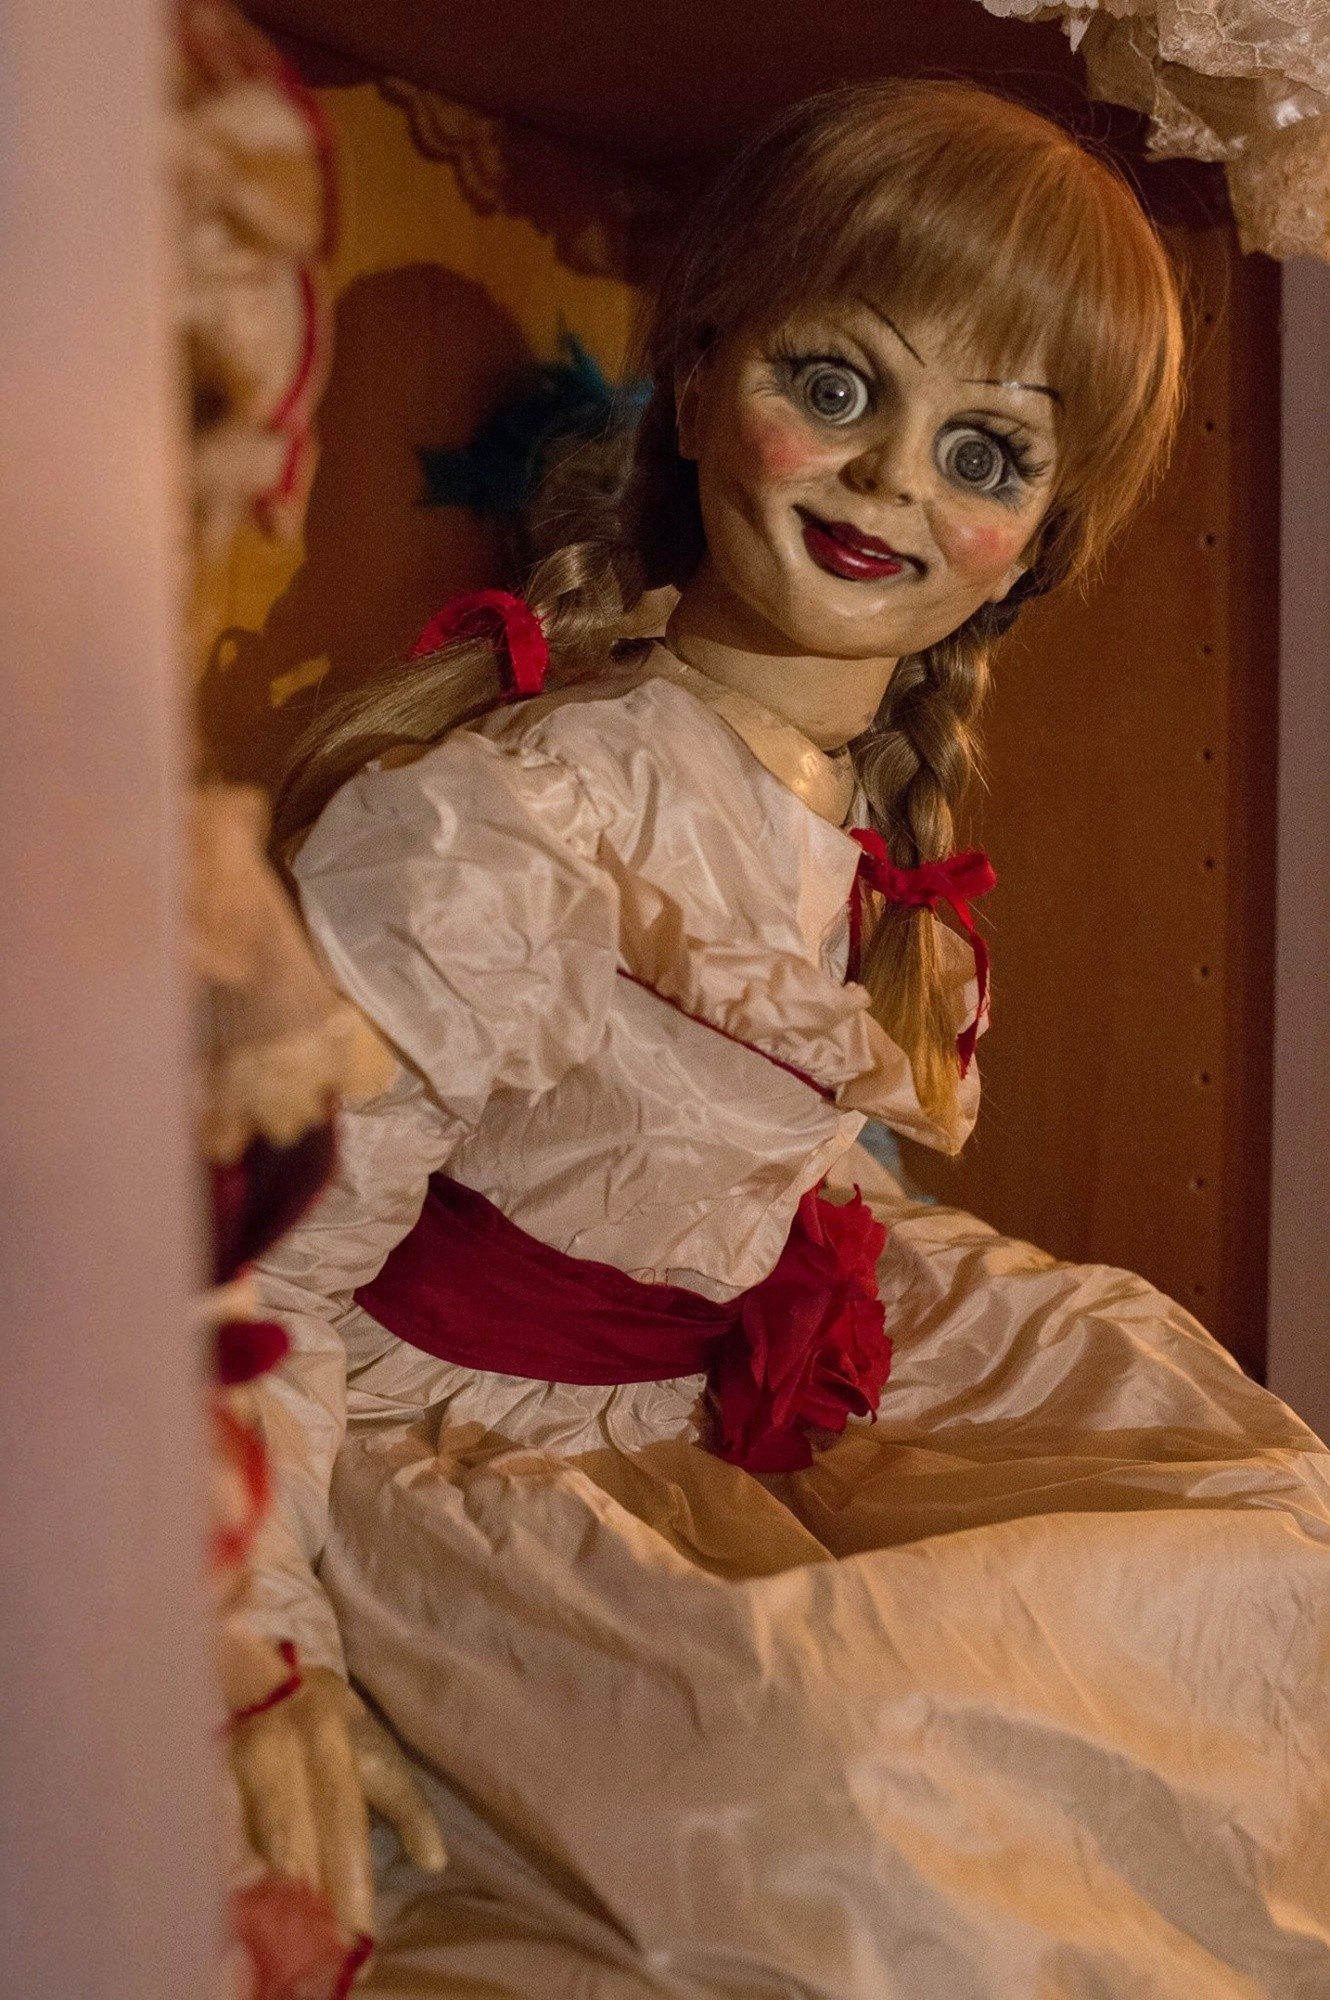 A scene from Warner Bros. Pictures' Annabelle (2014)